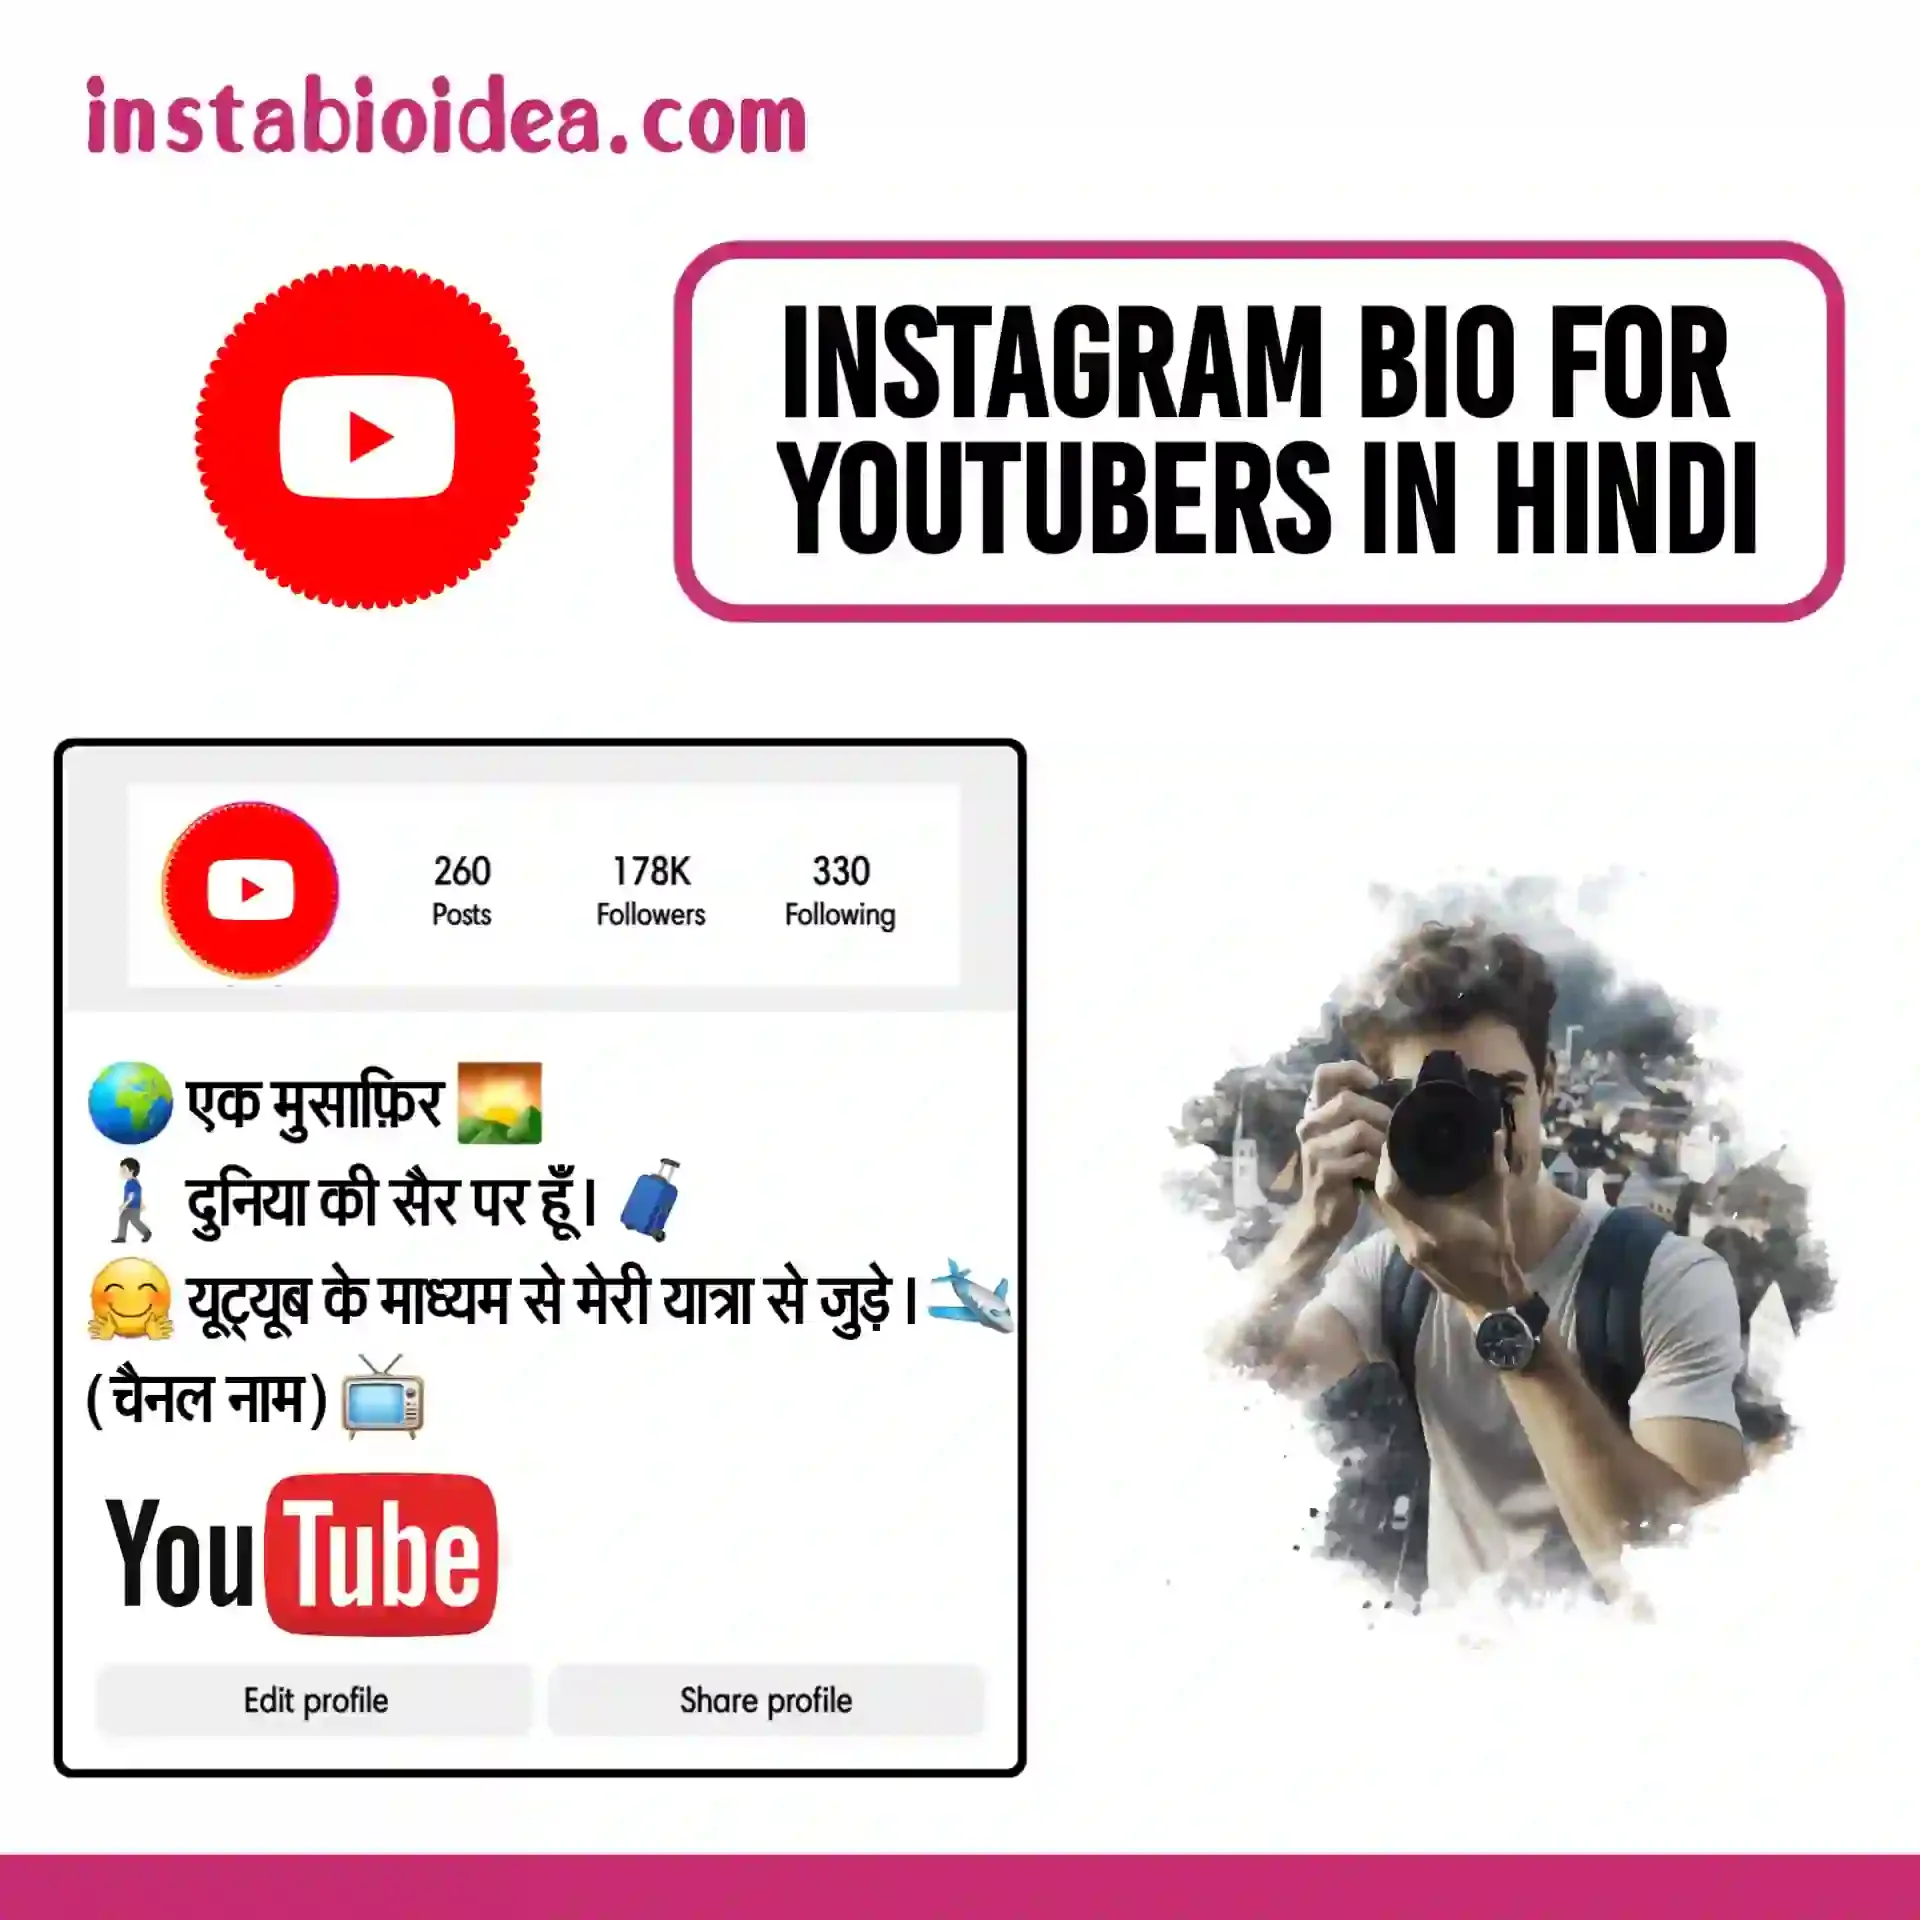 instagram bio for youtubers in hindi image